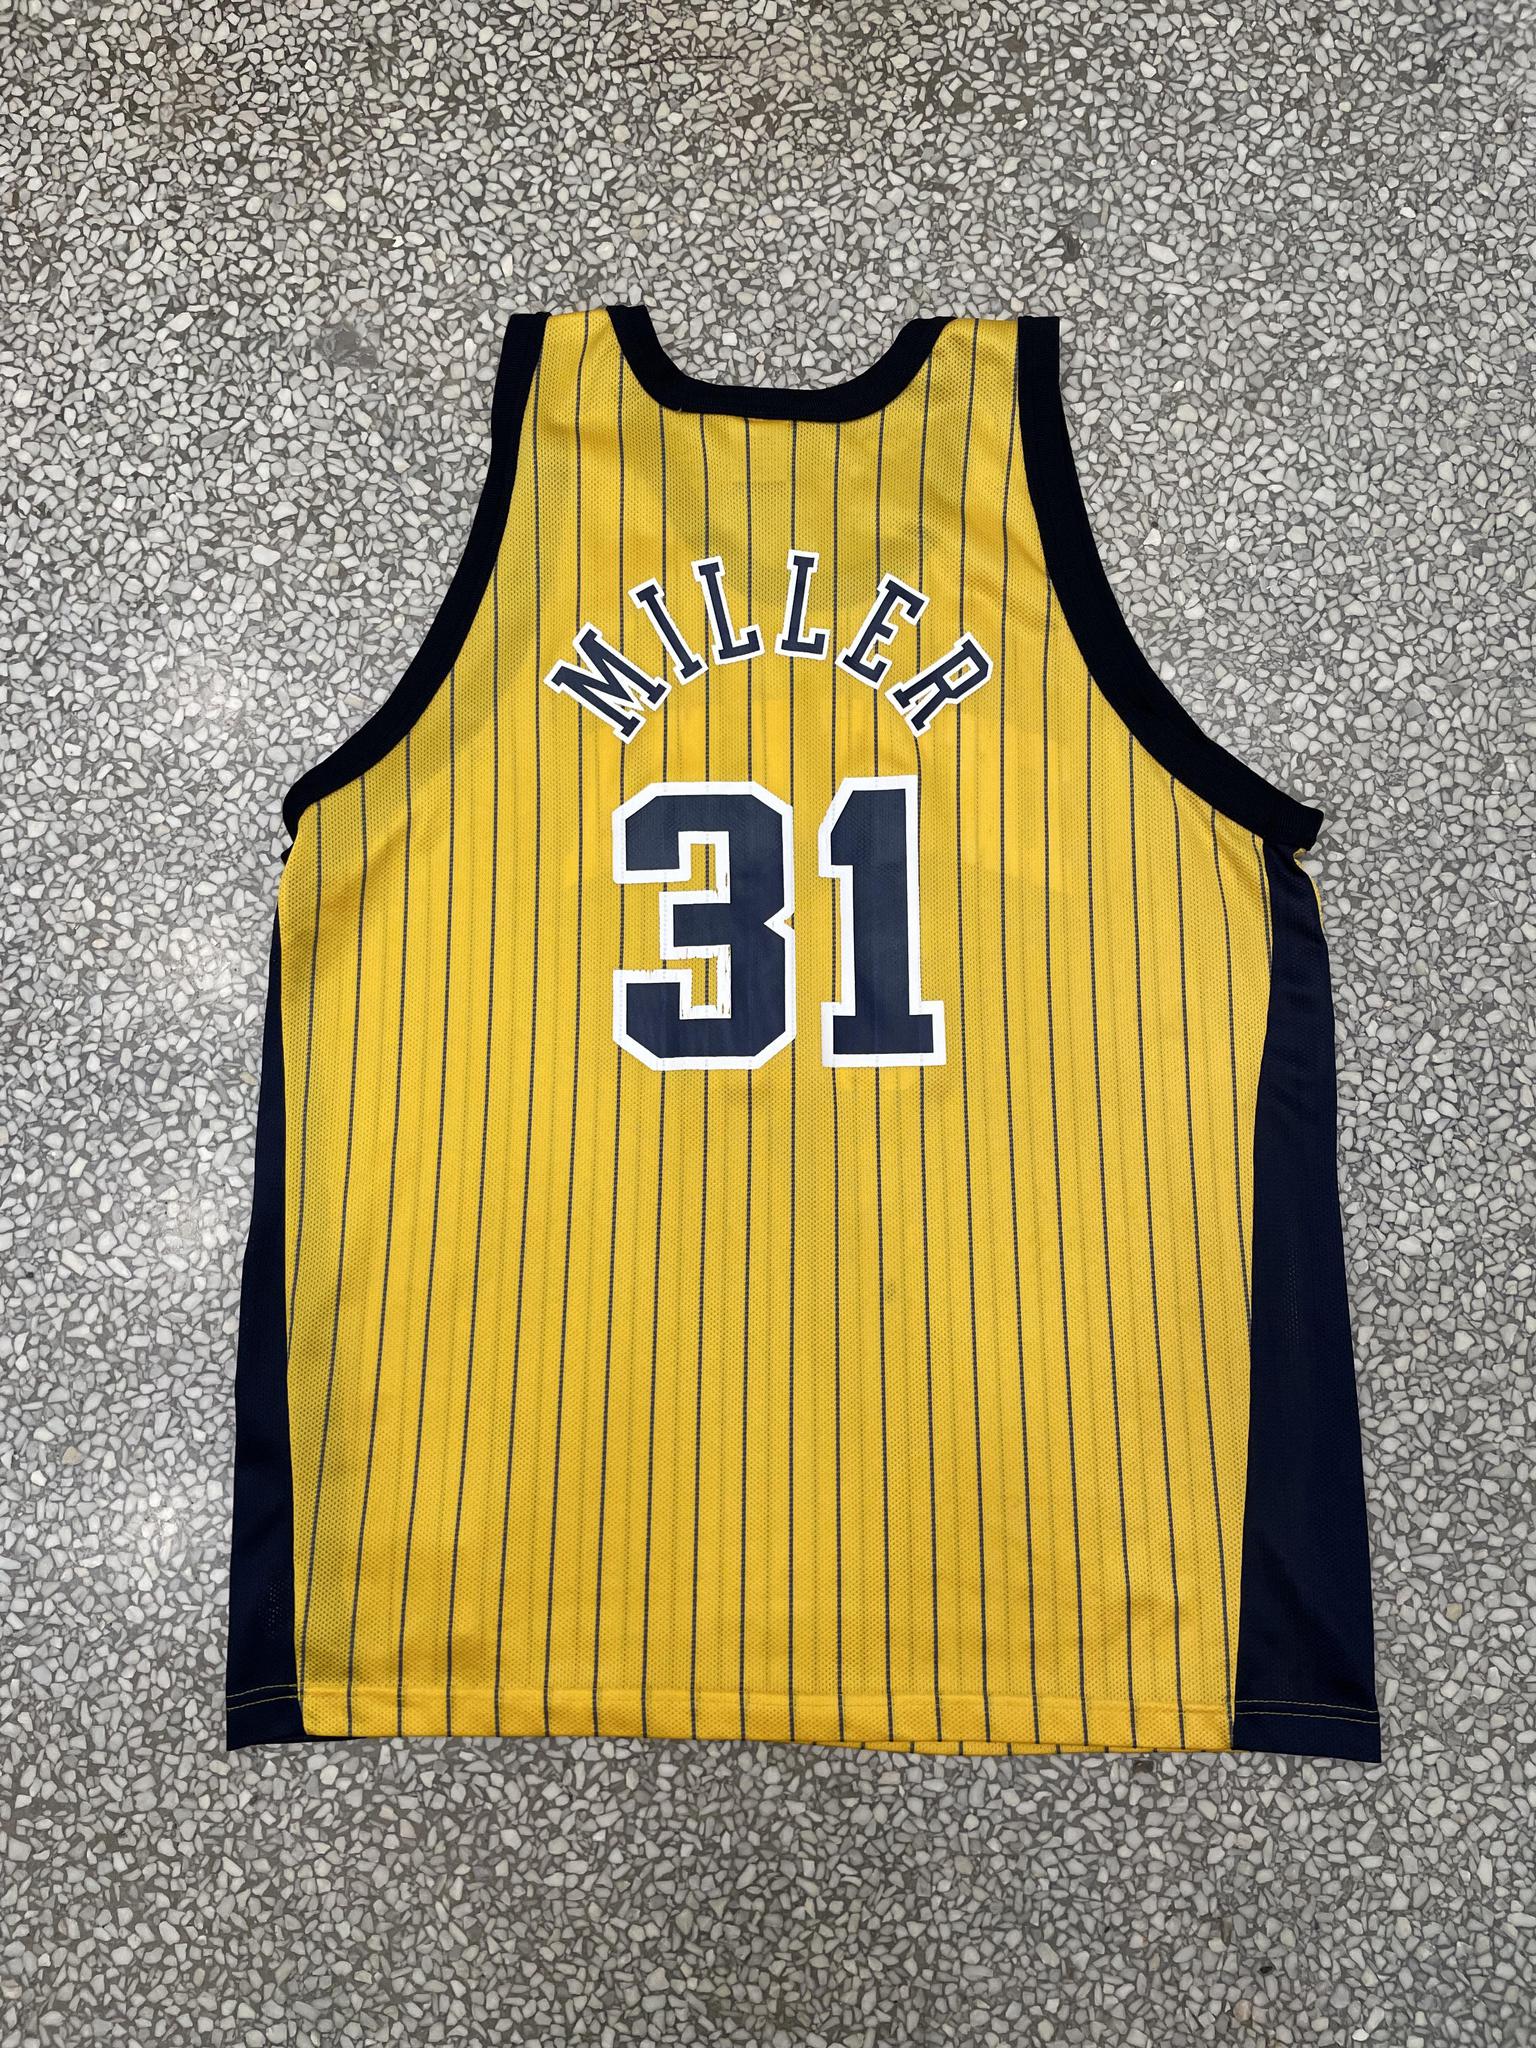 pacers miller jersey